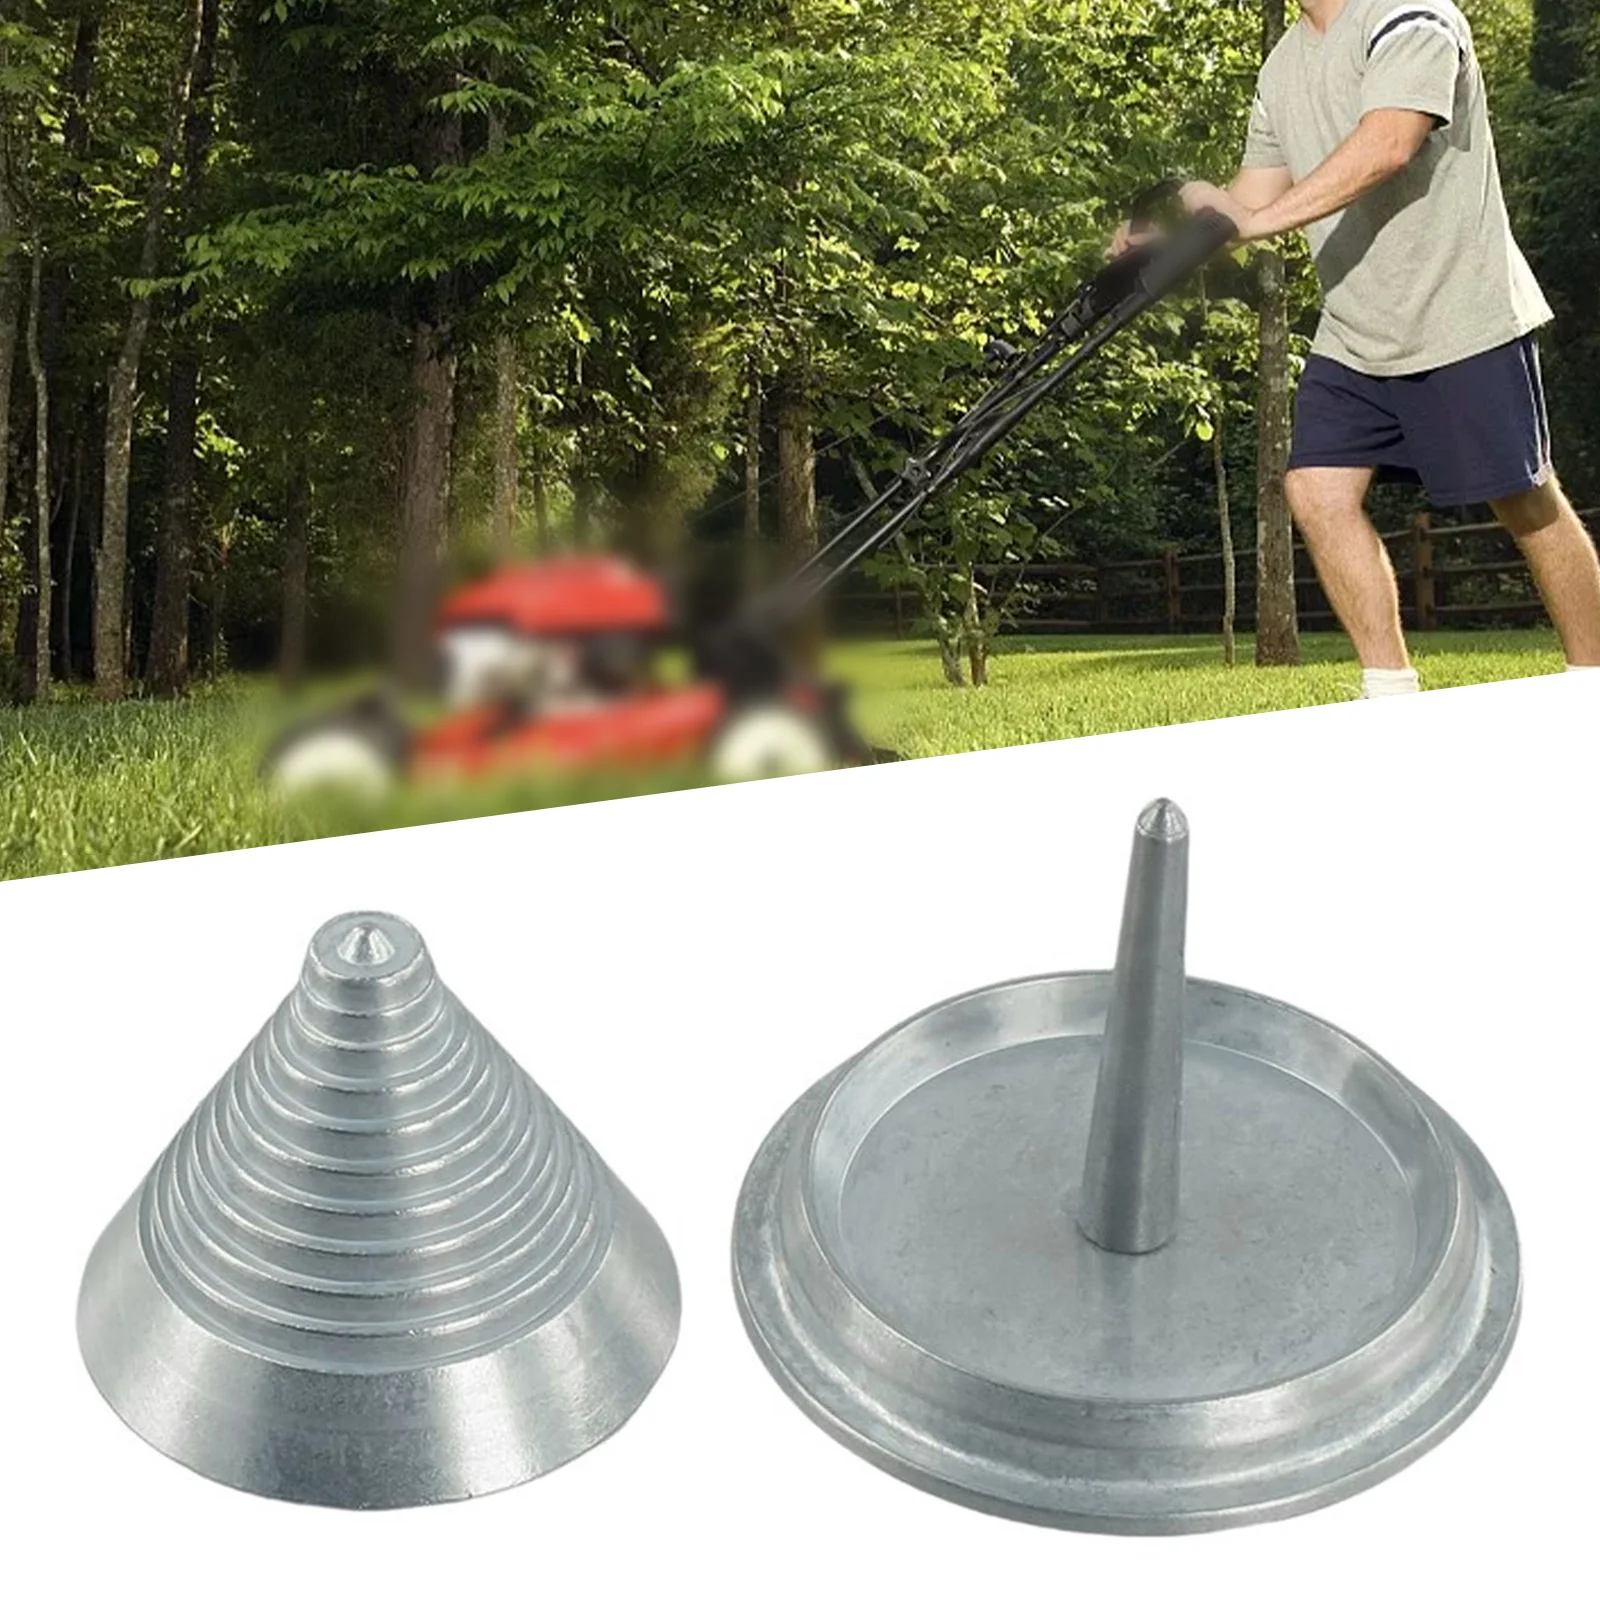 

1pcs Silver Metal Blade Blade Balancer 1pc Accessories For Smooth Mowing Garden Power Tools Lawn Mower Reduces Vibration New